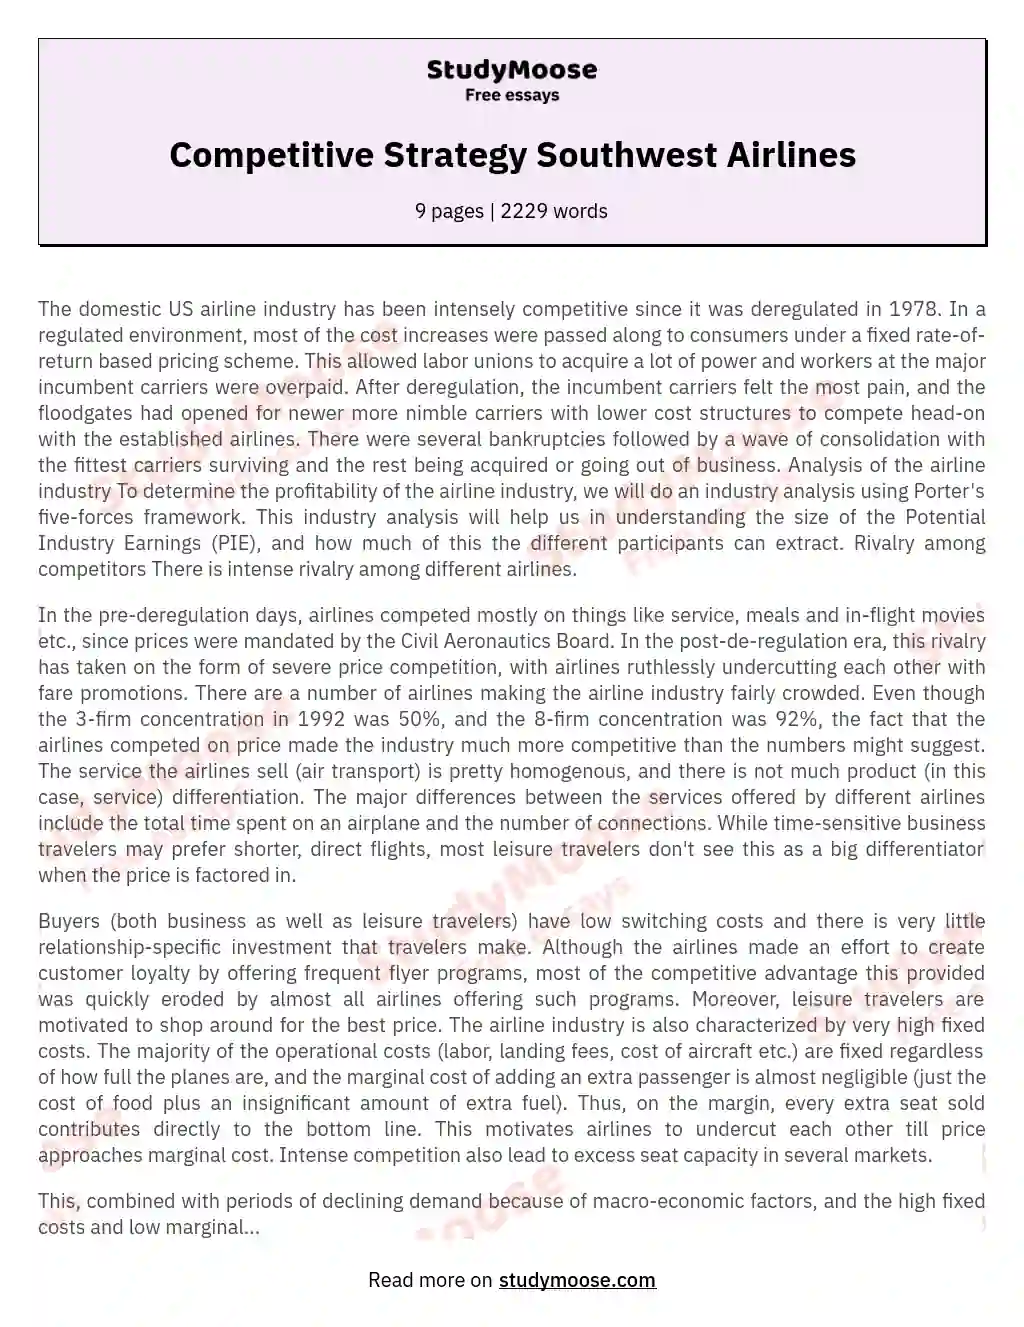 Competitive Strategy Southwest Airlines essay